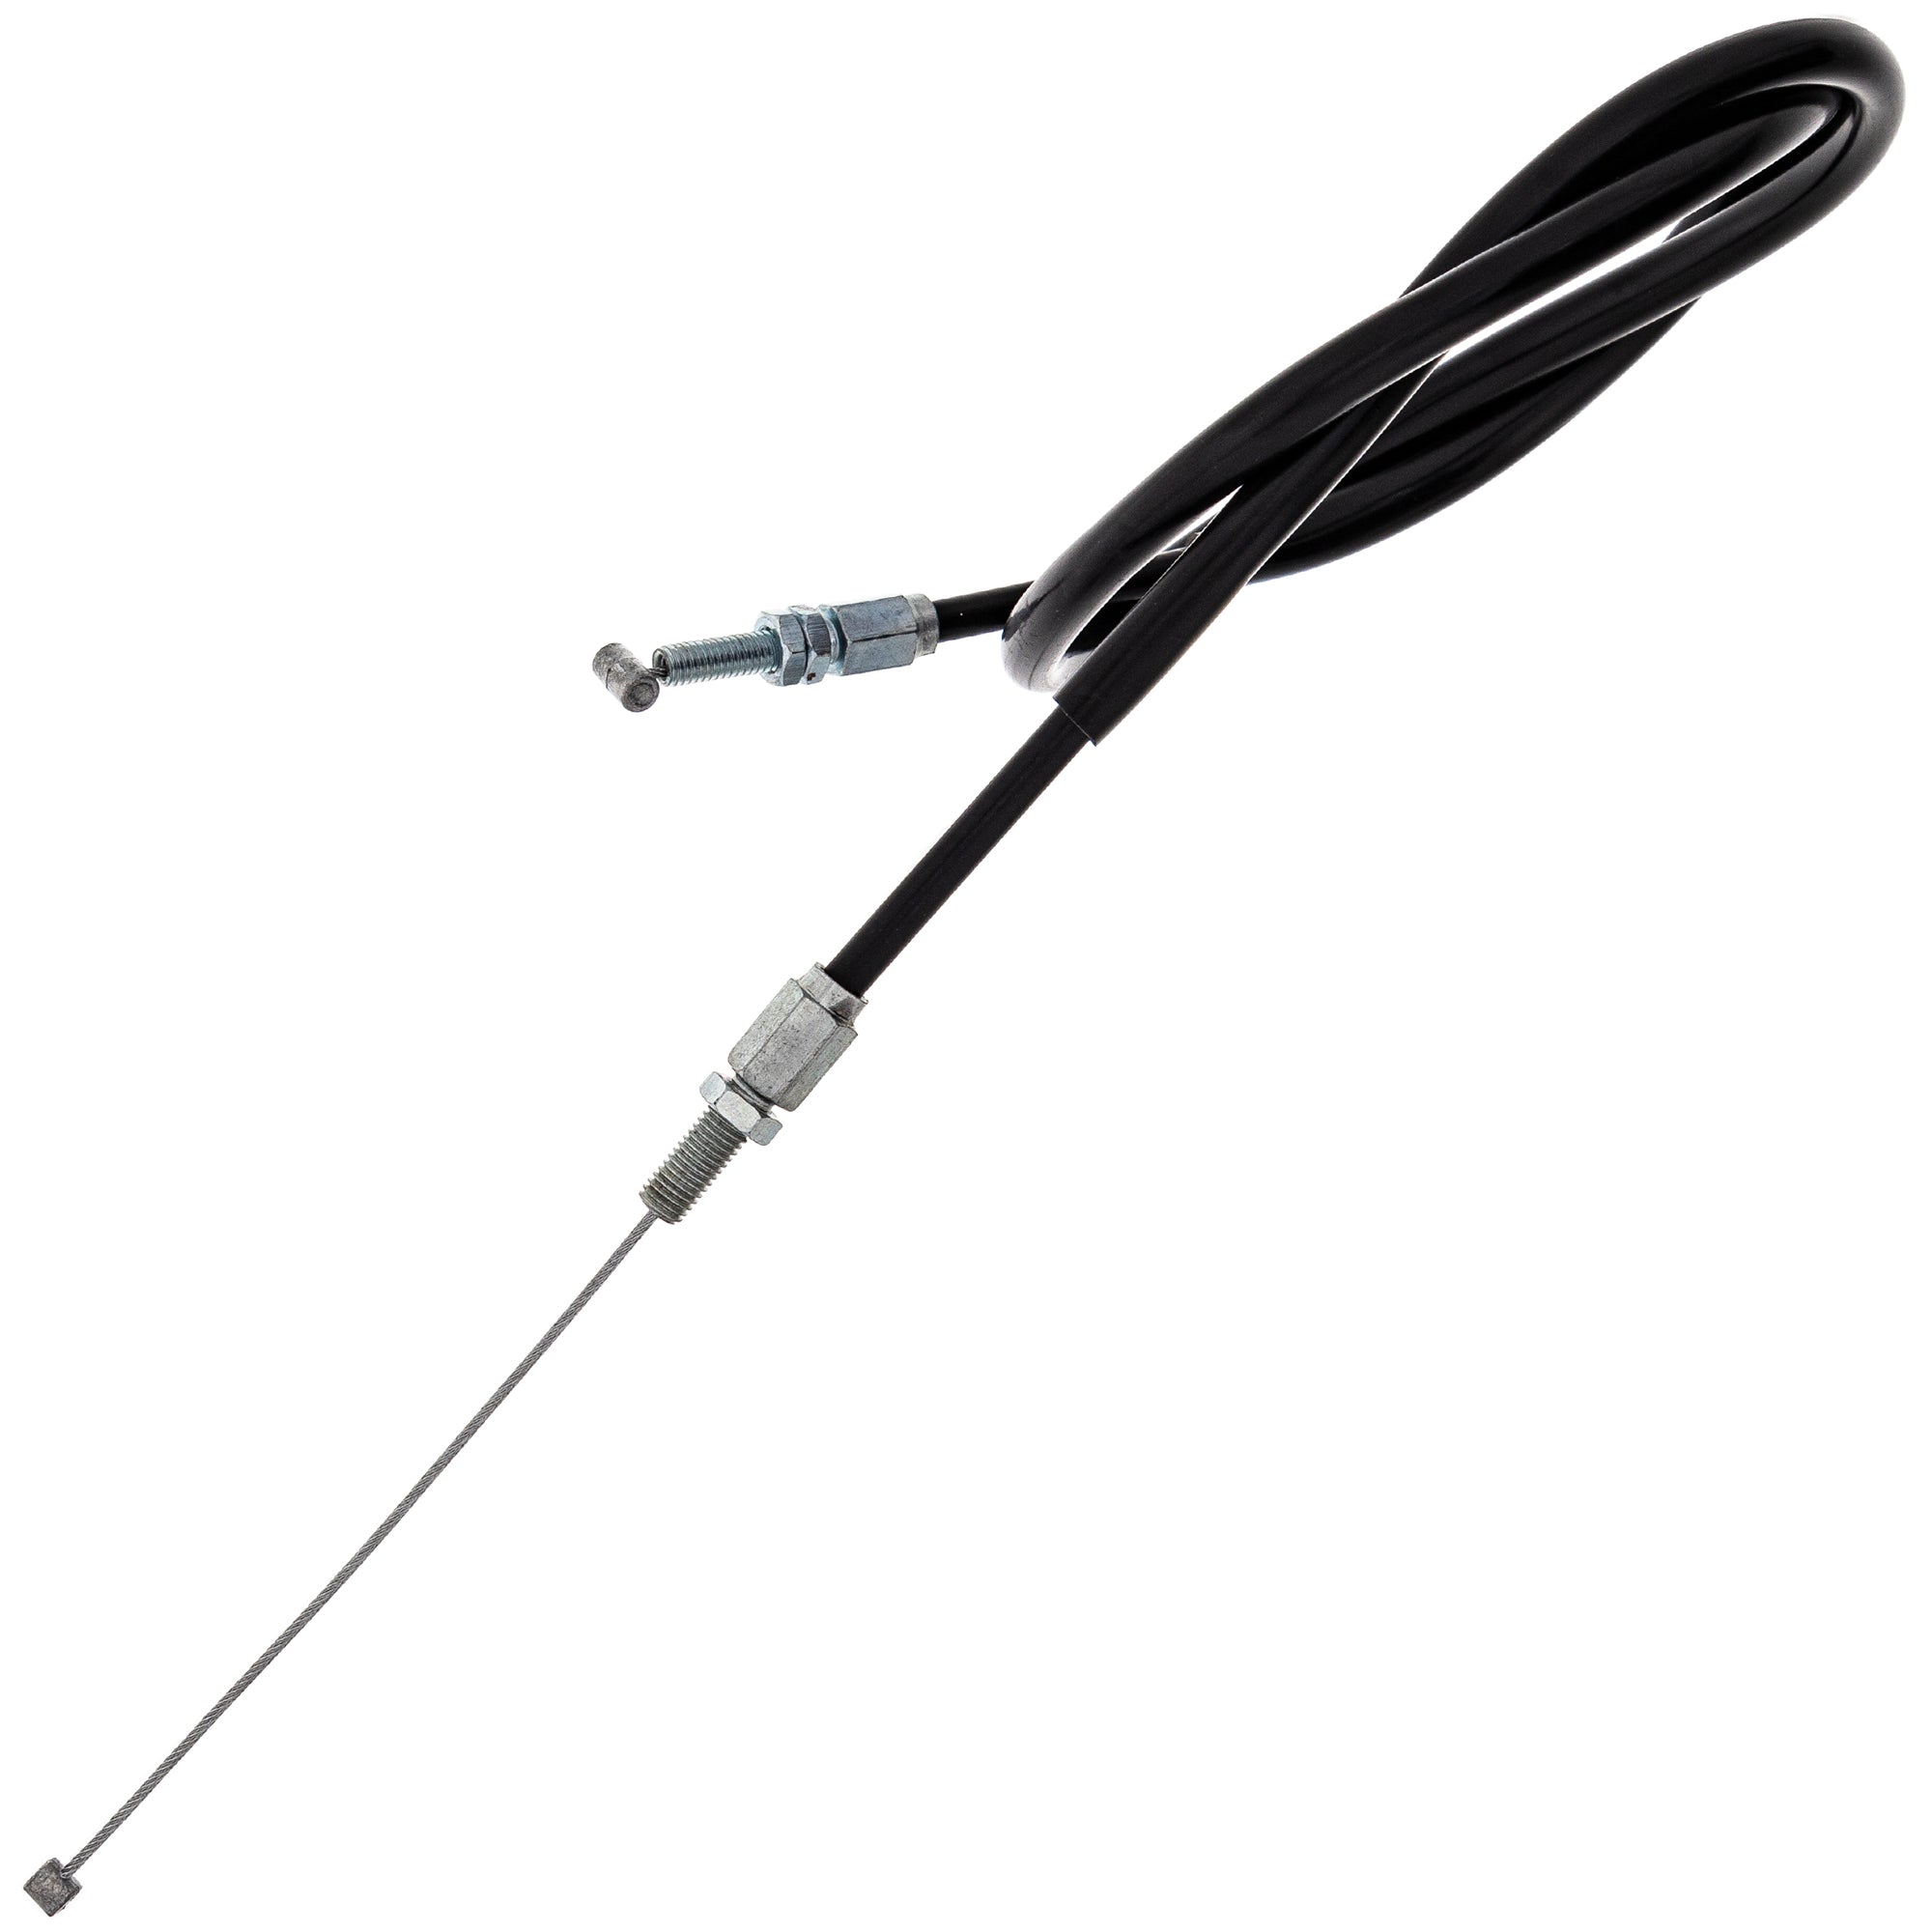 Throttle Cable for Honda XR650L 17910-MY6-670 Motorcycle